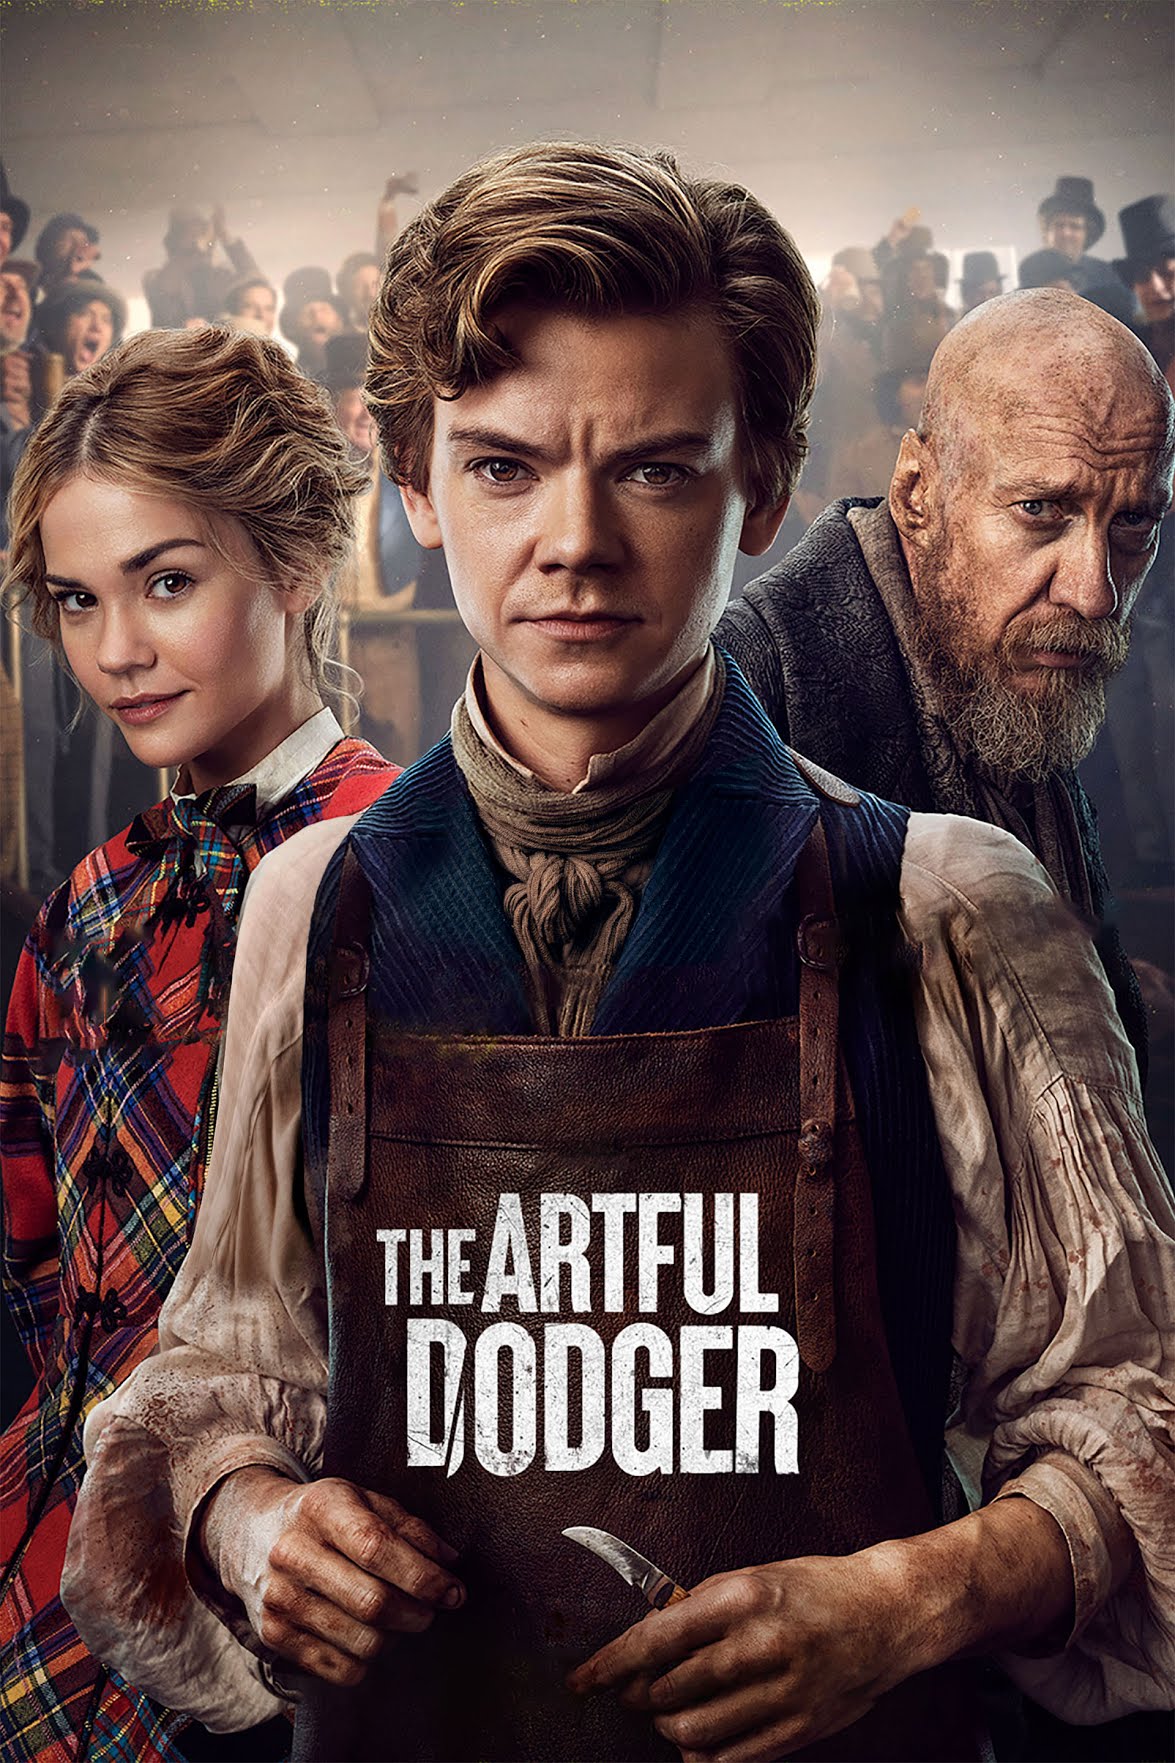 Review: The Artful Dodger